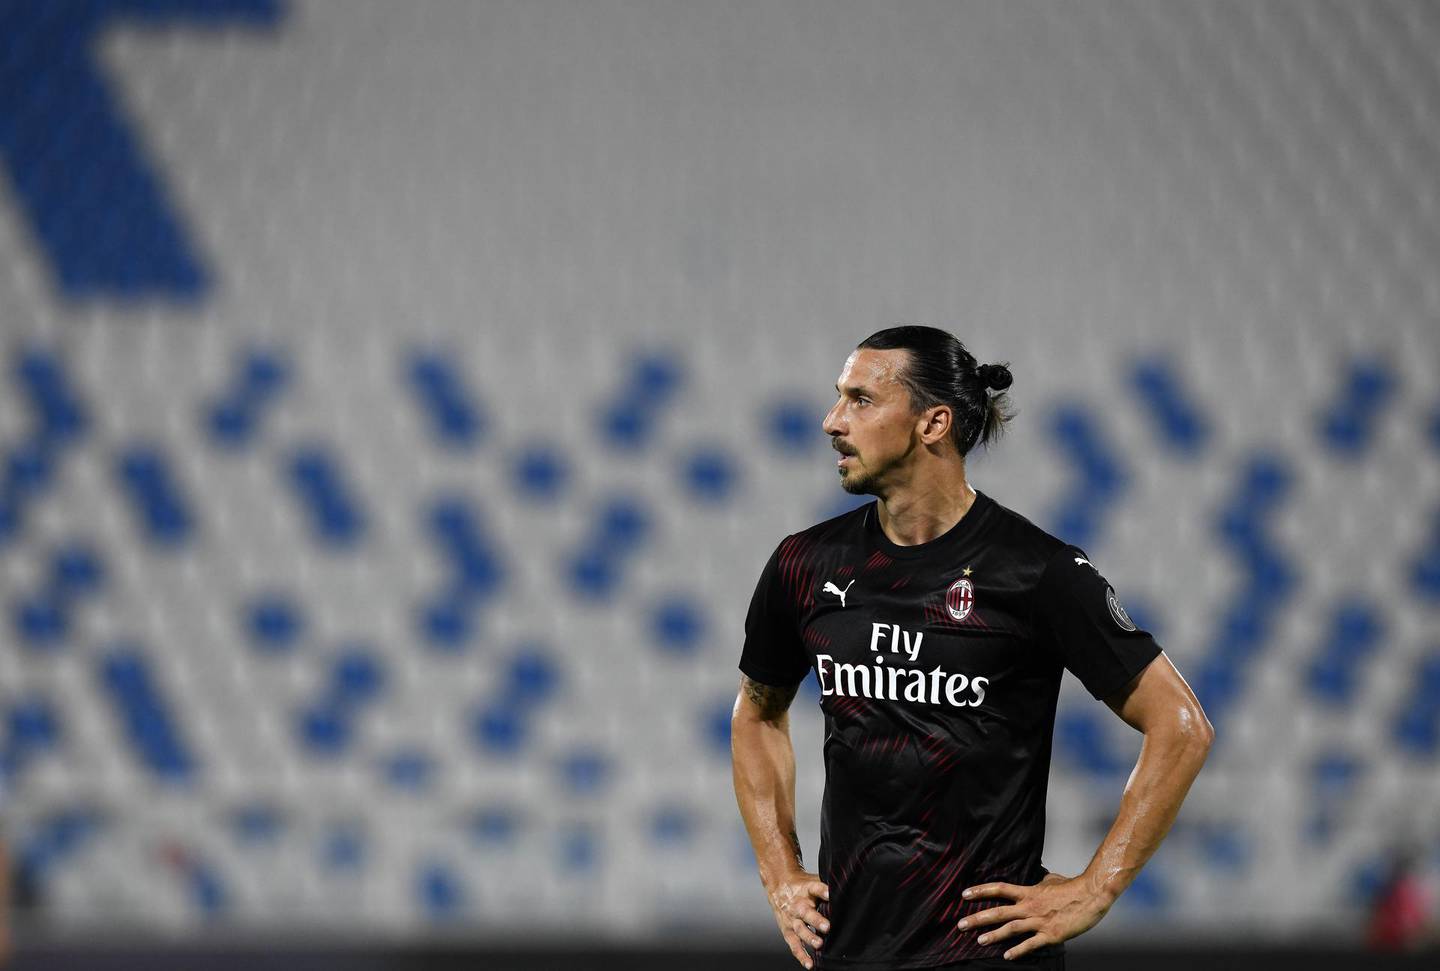 FERRARA, ITALY - JULY 01: Zlatan Ibrahimovic of AC Milan during the Serie A match between SPAL and AC Milan at Stadio Paolo Mazza on July 1, 2020 in Ferrara, Italy. (Photo by Chris Ricco/Getty Images)